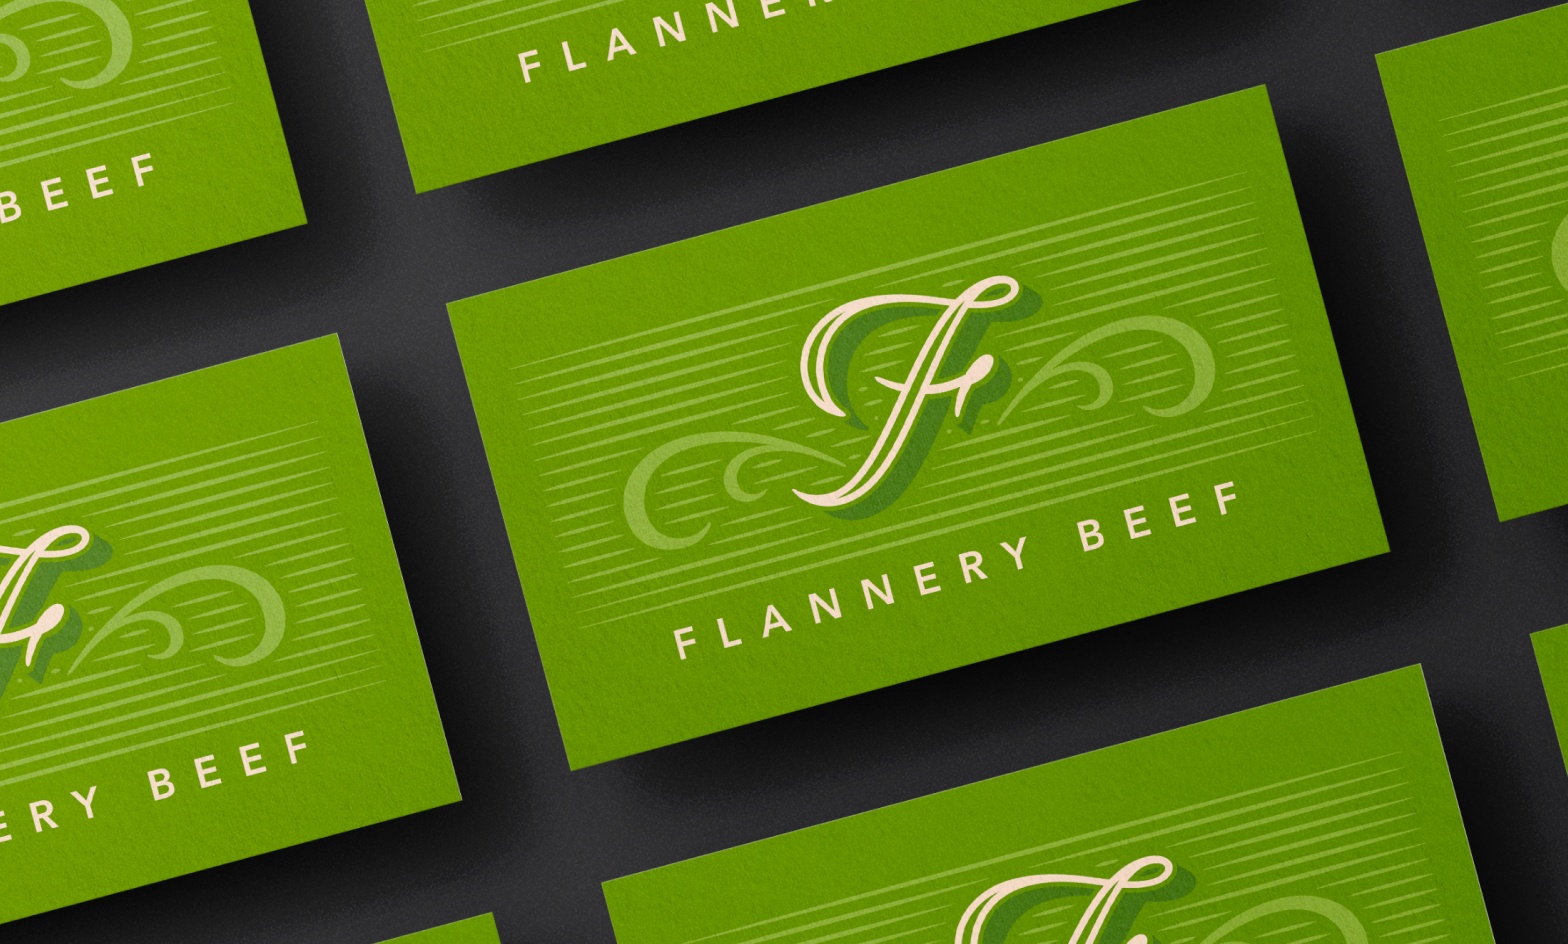 flannery-beef-business-cards